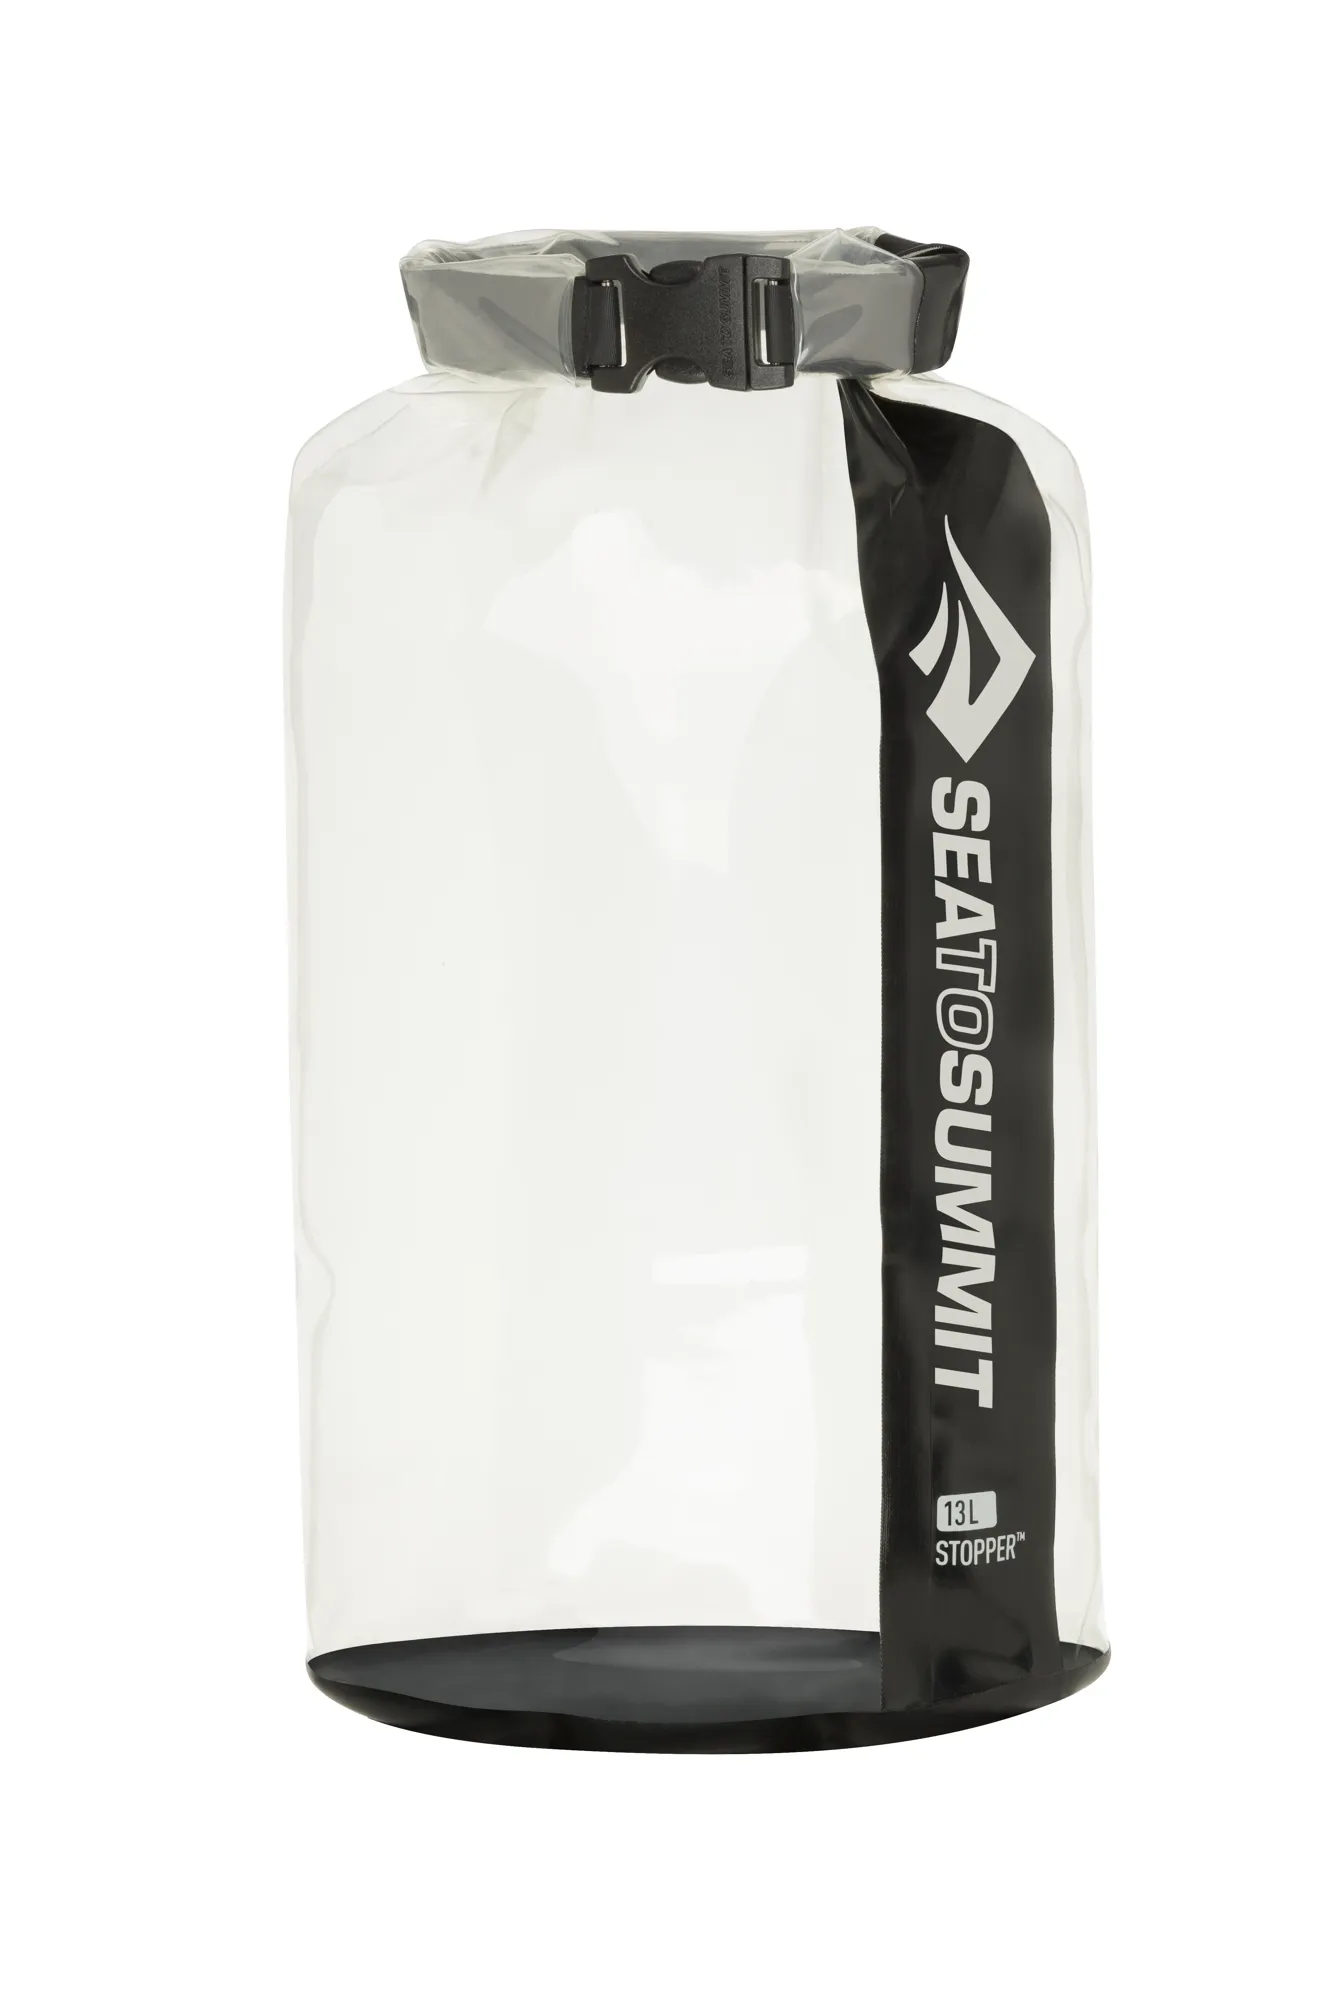 Sea to Summit - Stopper Clear Dry Bag - 13L